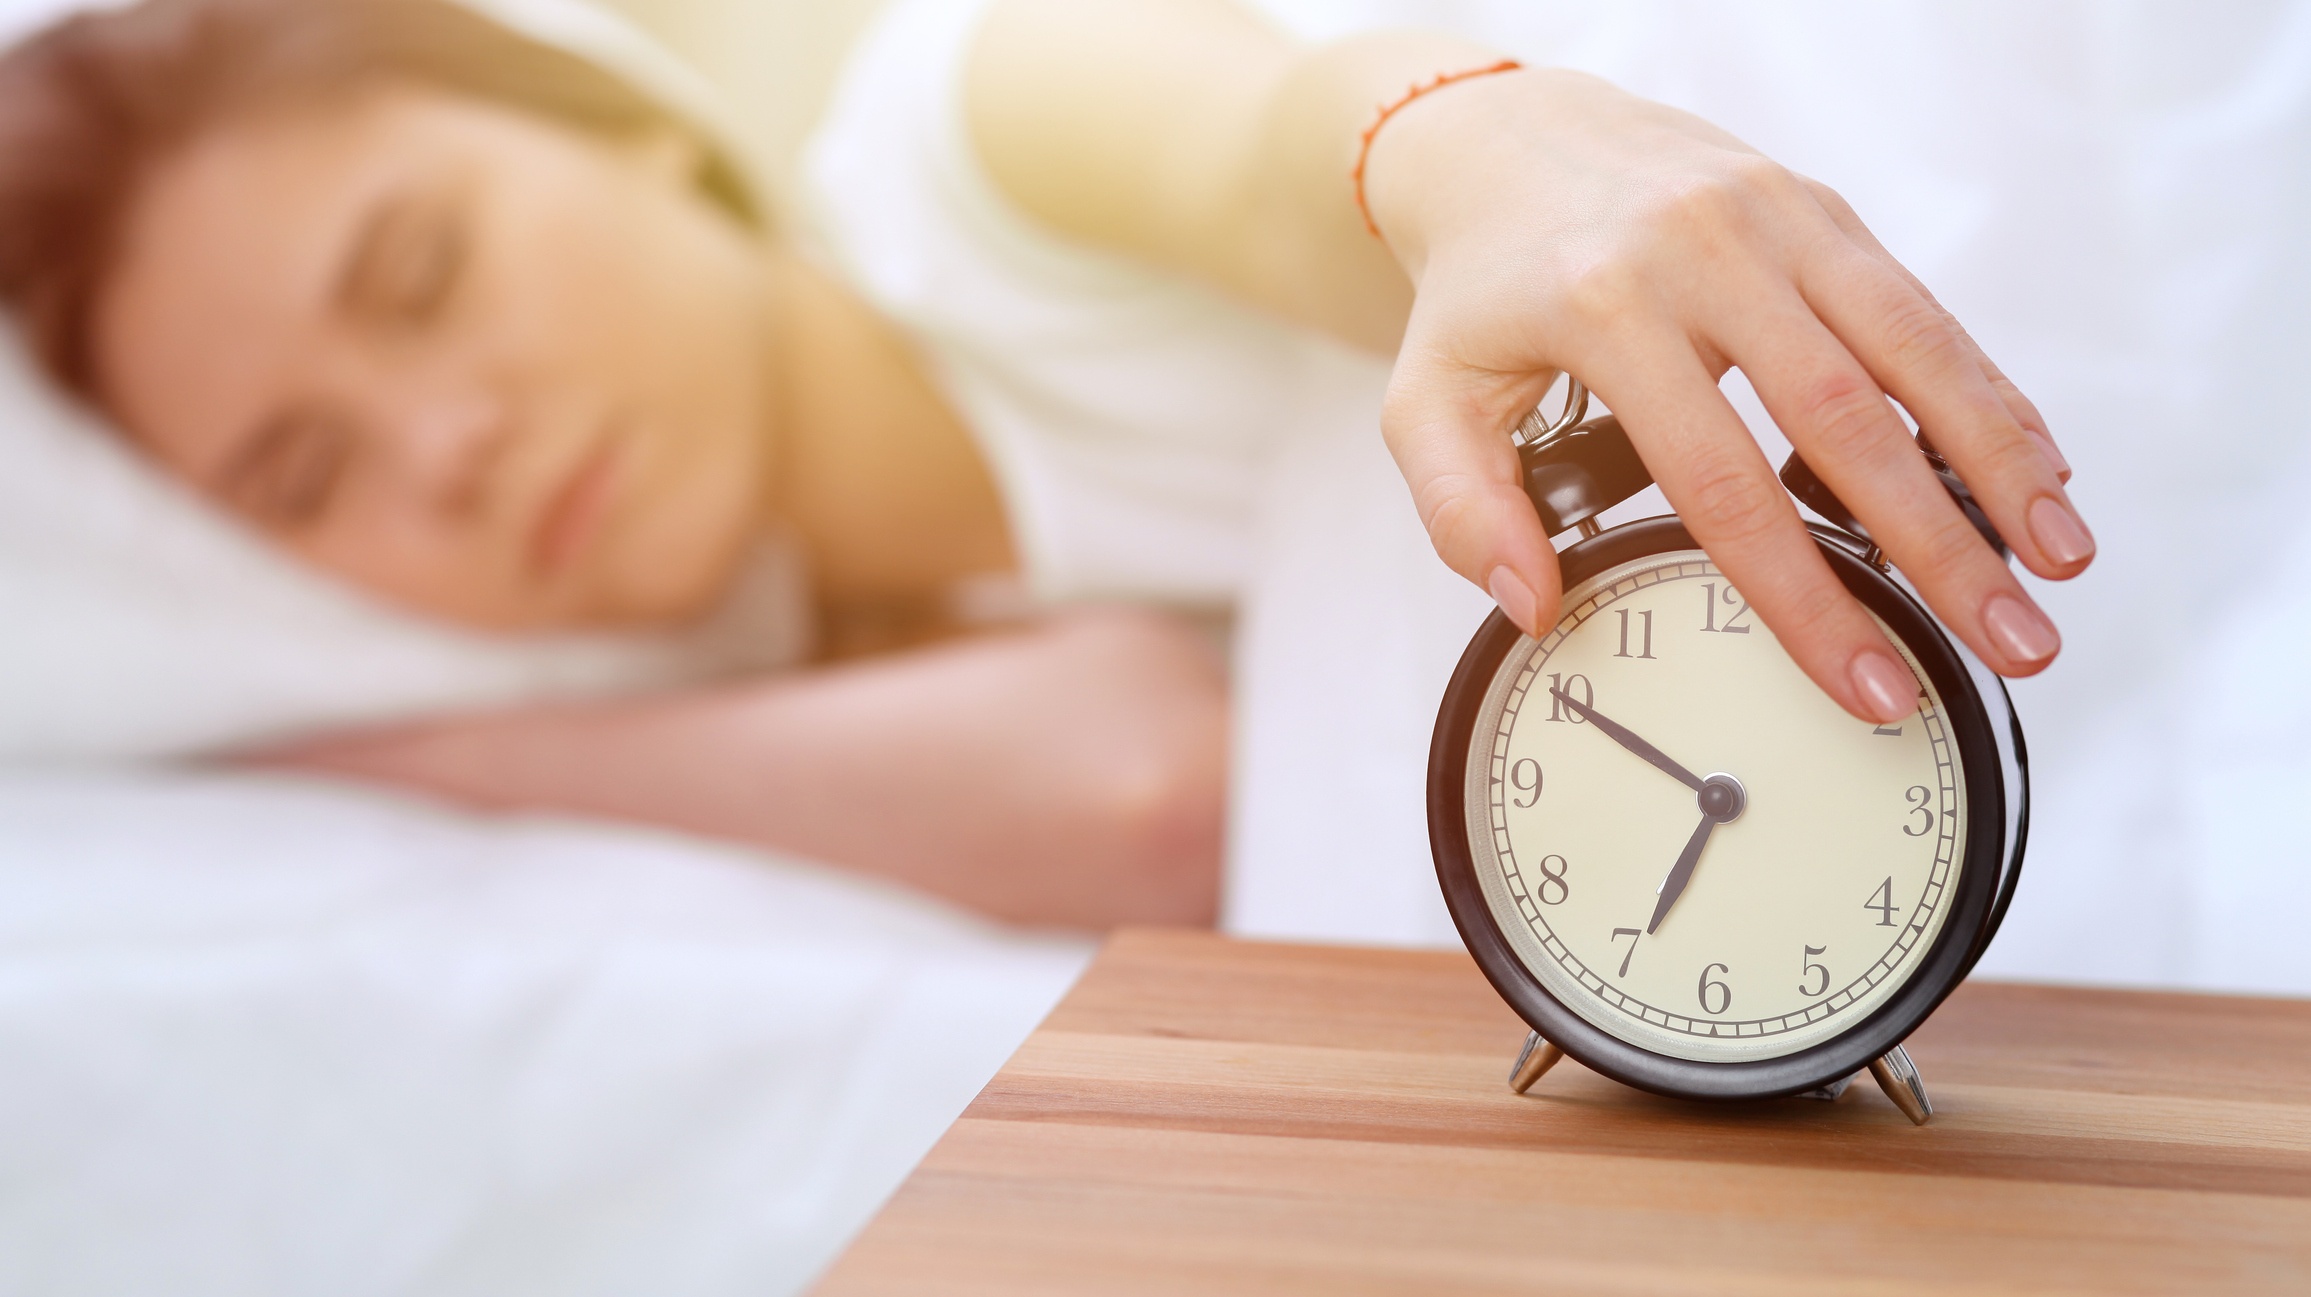 Alarm clock opposite of sleepy young woman stretching hand to ringing alarm willing turn it off. Early wake up, not getting enough sleep concept